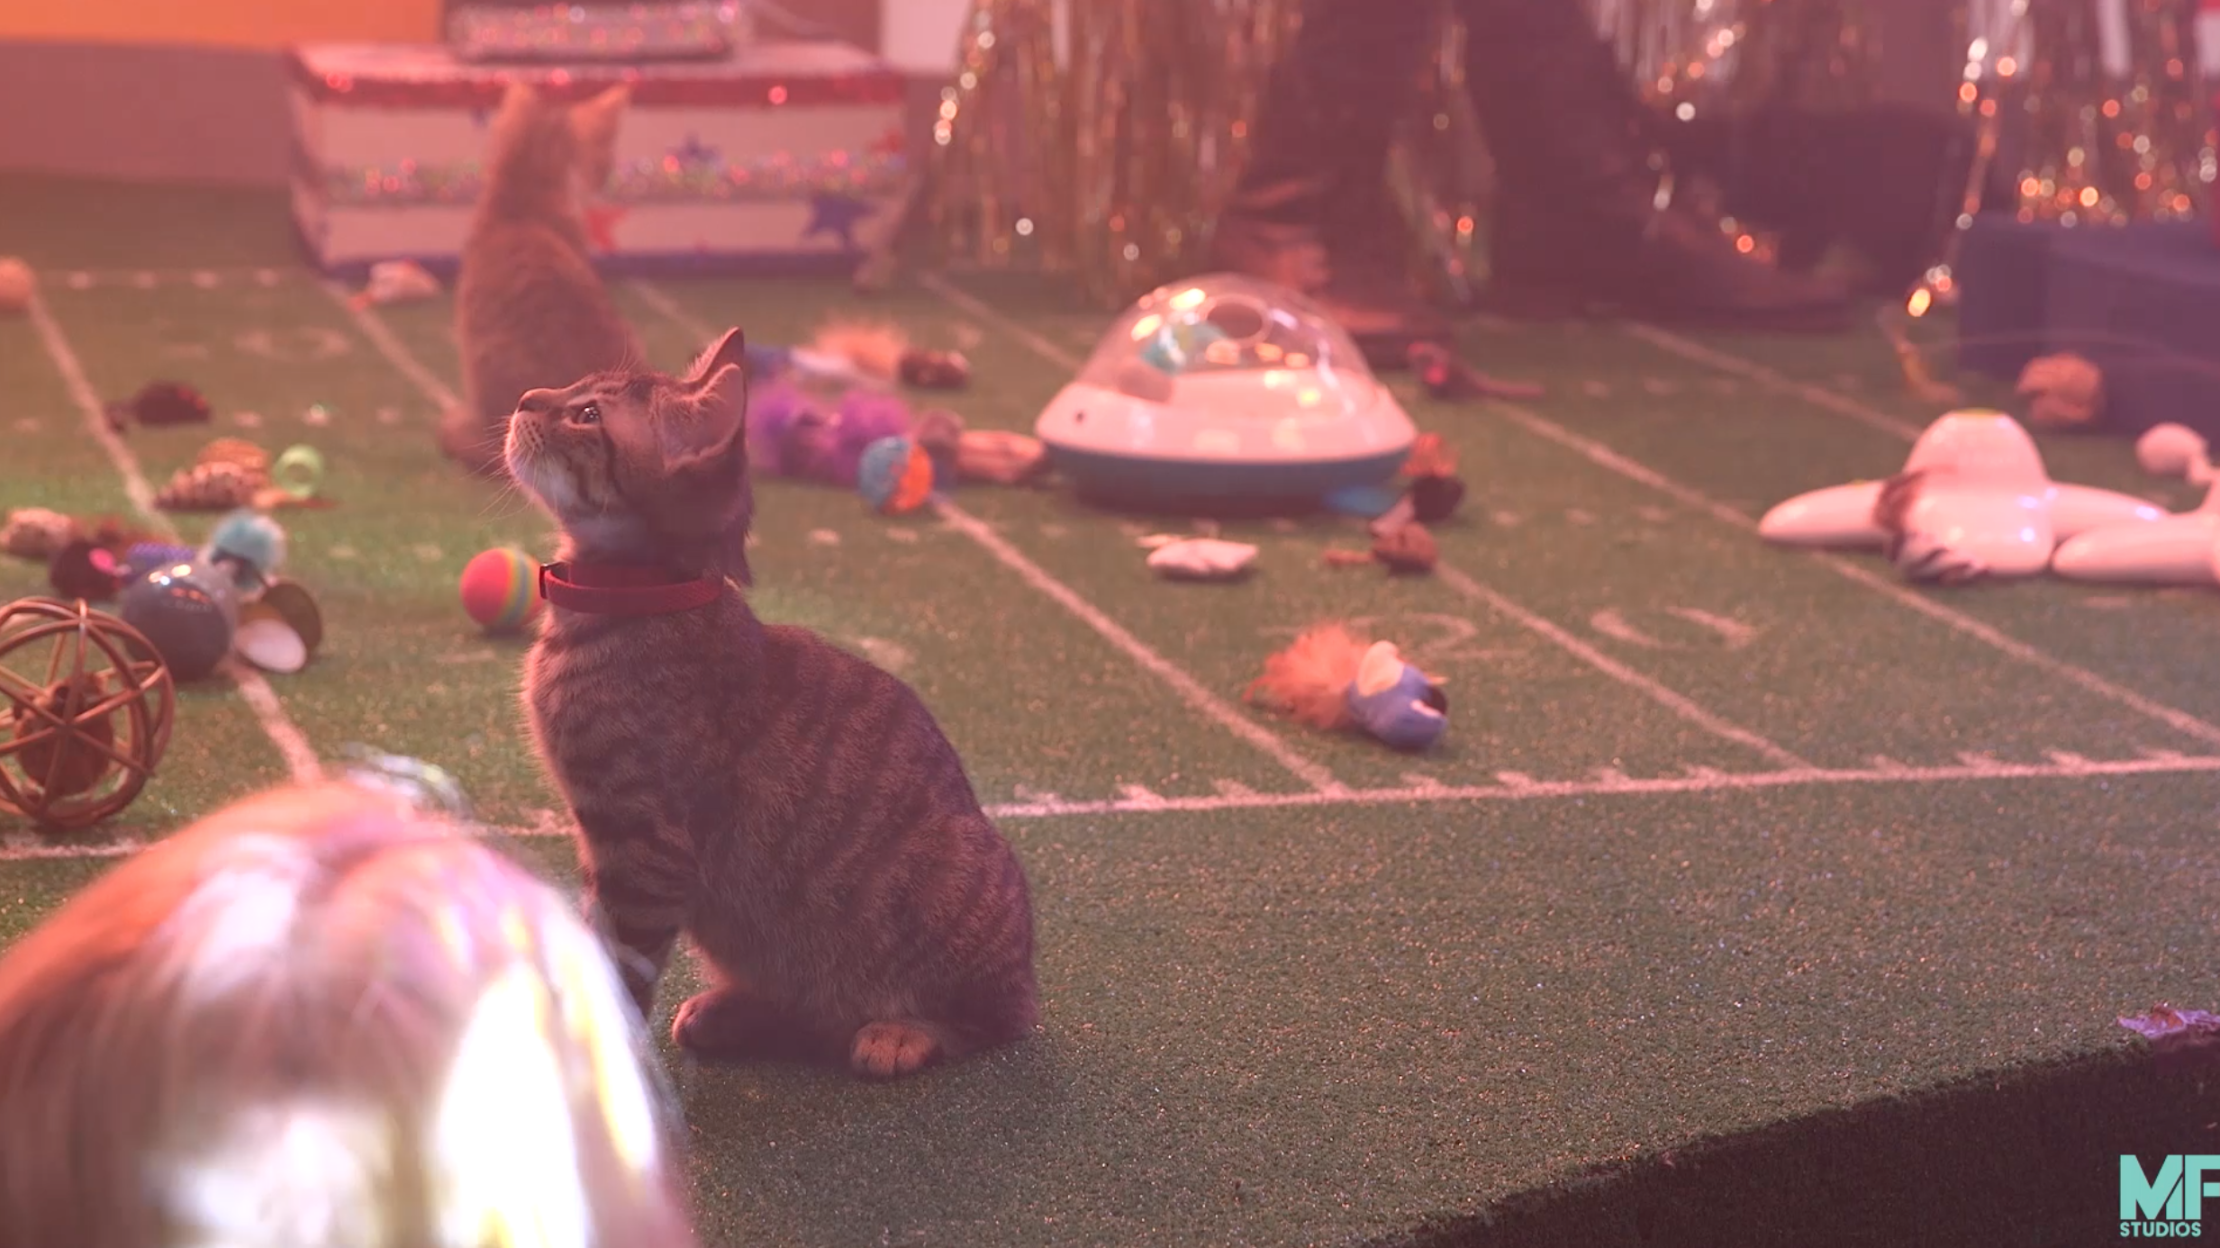 Kittens Take the Stage at the Puppy Bowl Halftime Show Video Mental